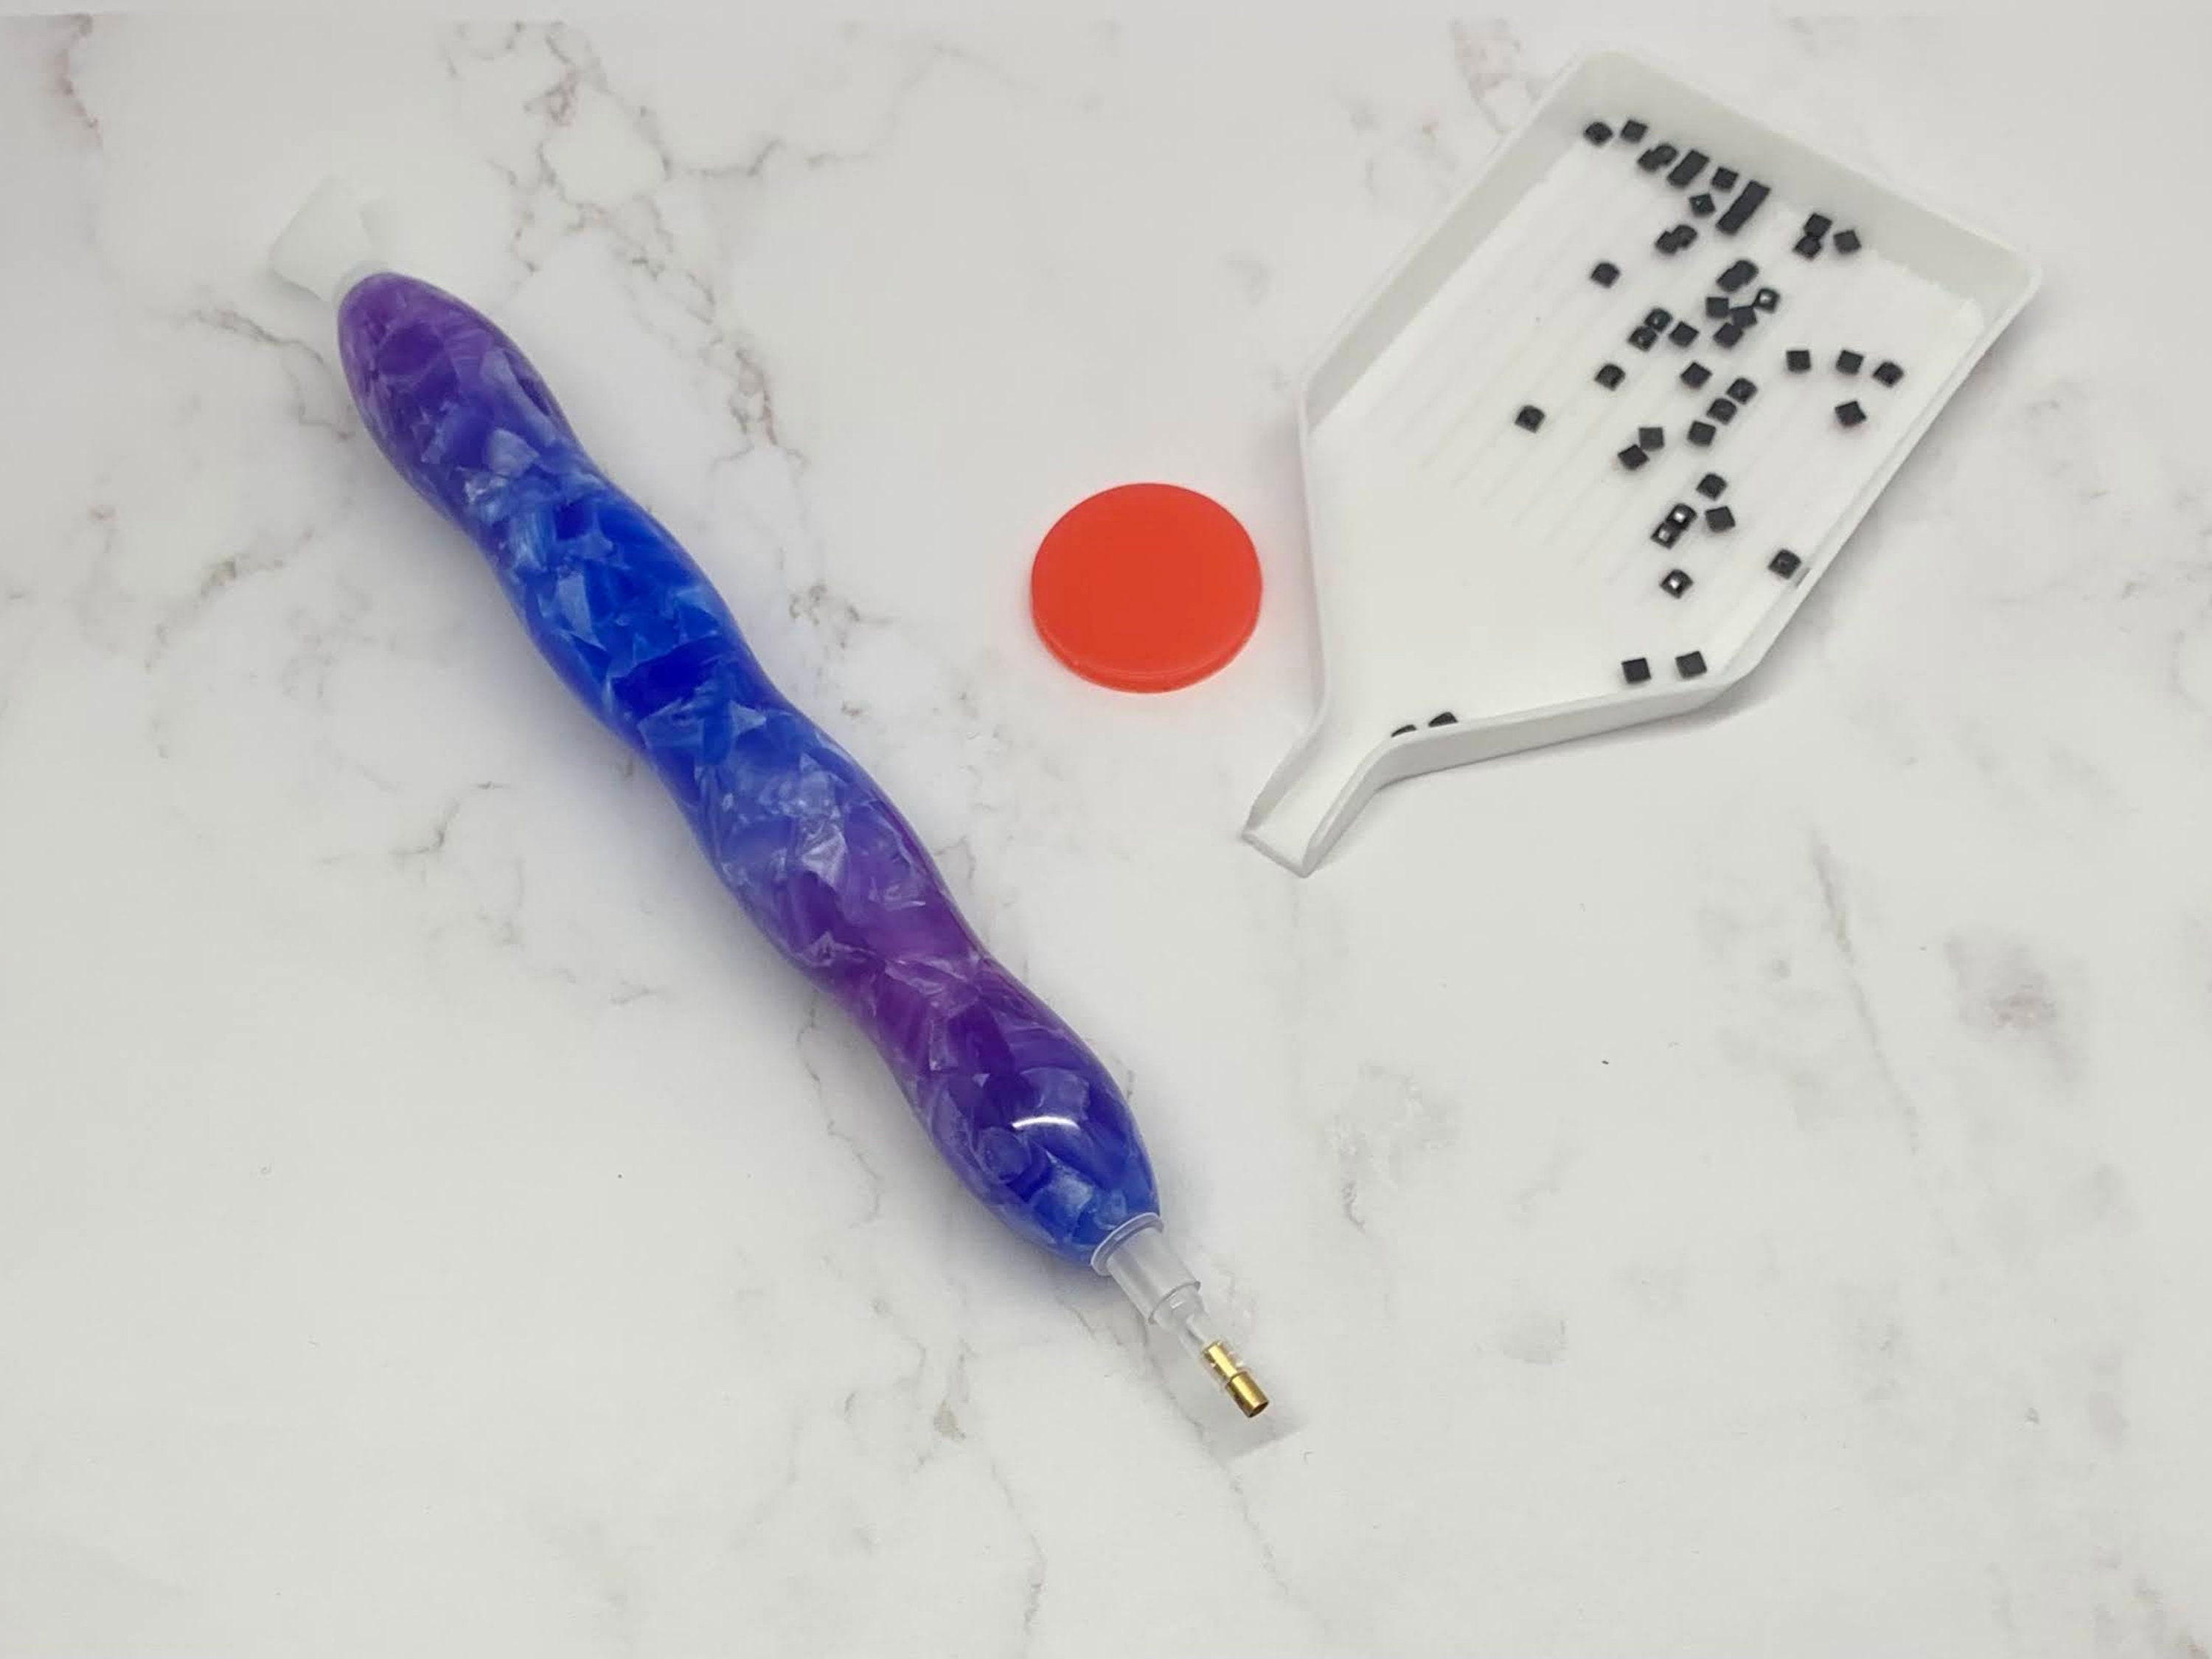 Glow in the Dark Diamond Painting Pen With Diamond Painting Tools and  Accessories, Diamond Painting Accessories Pens Diamond Art Tools Pen 